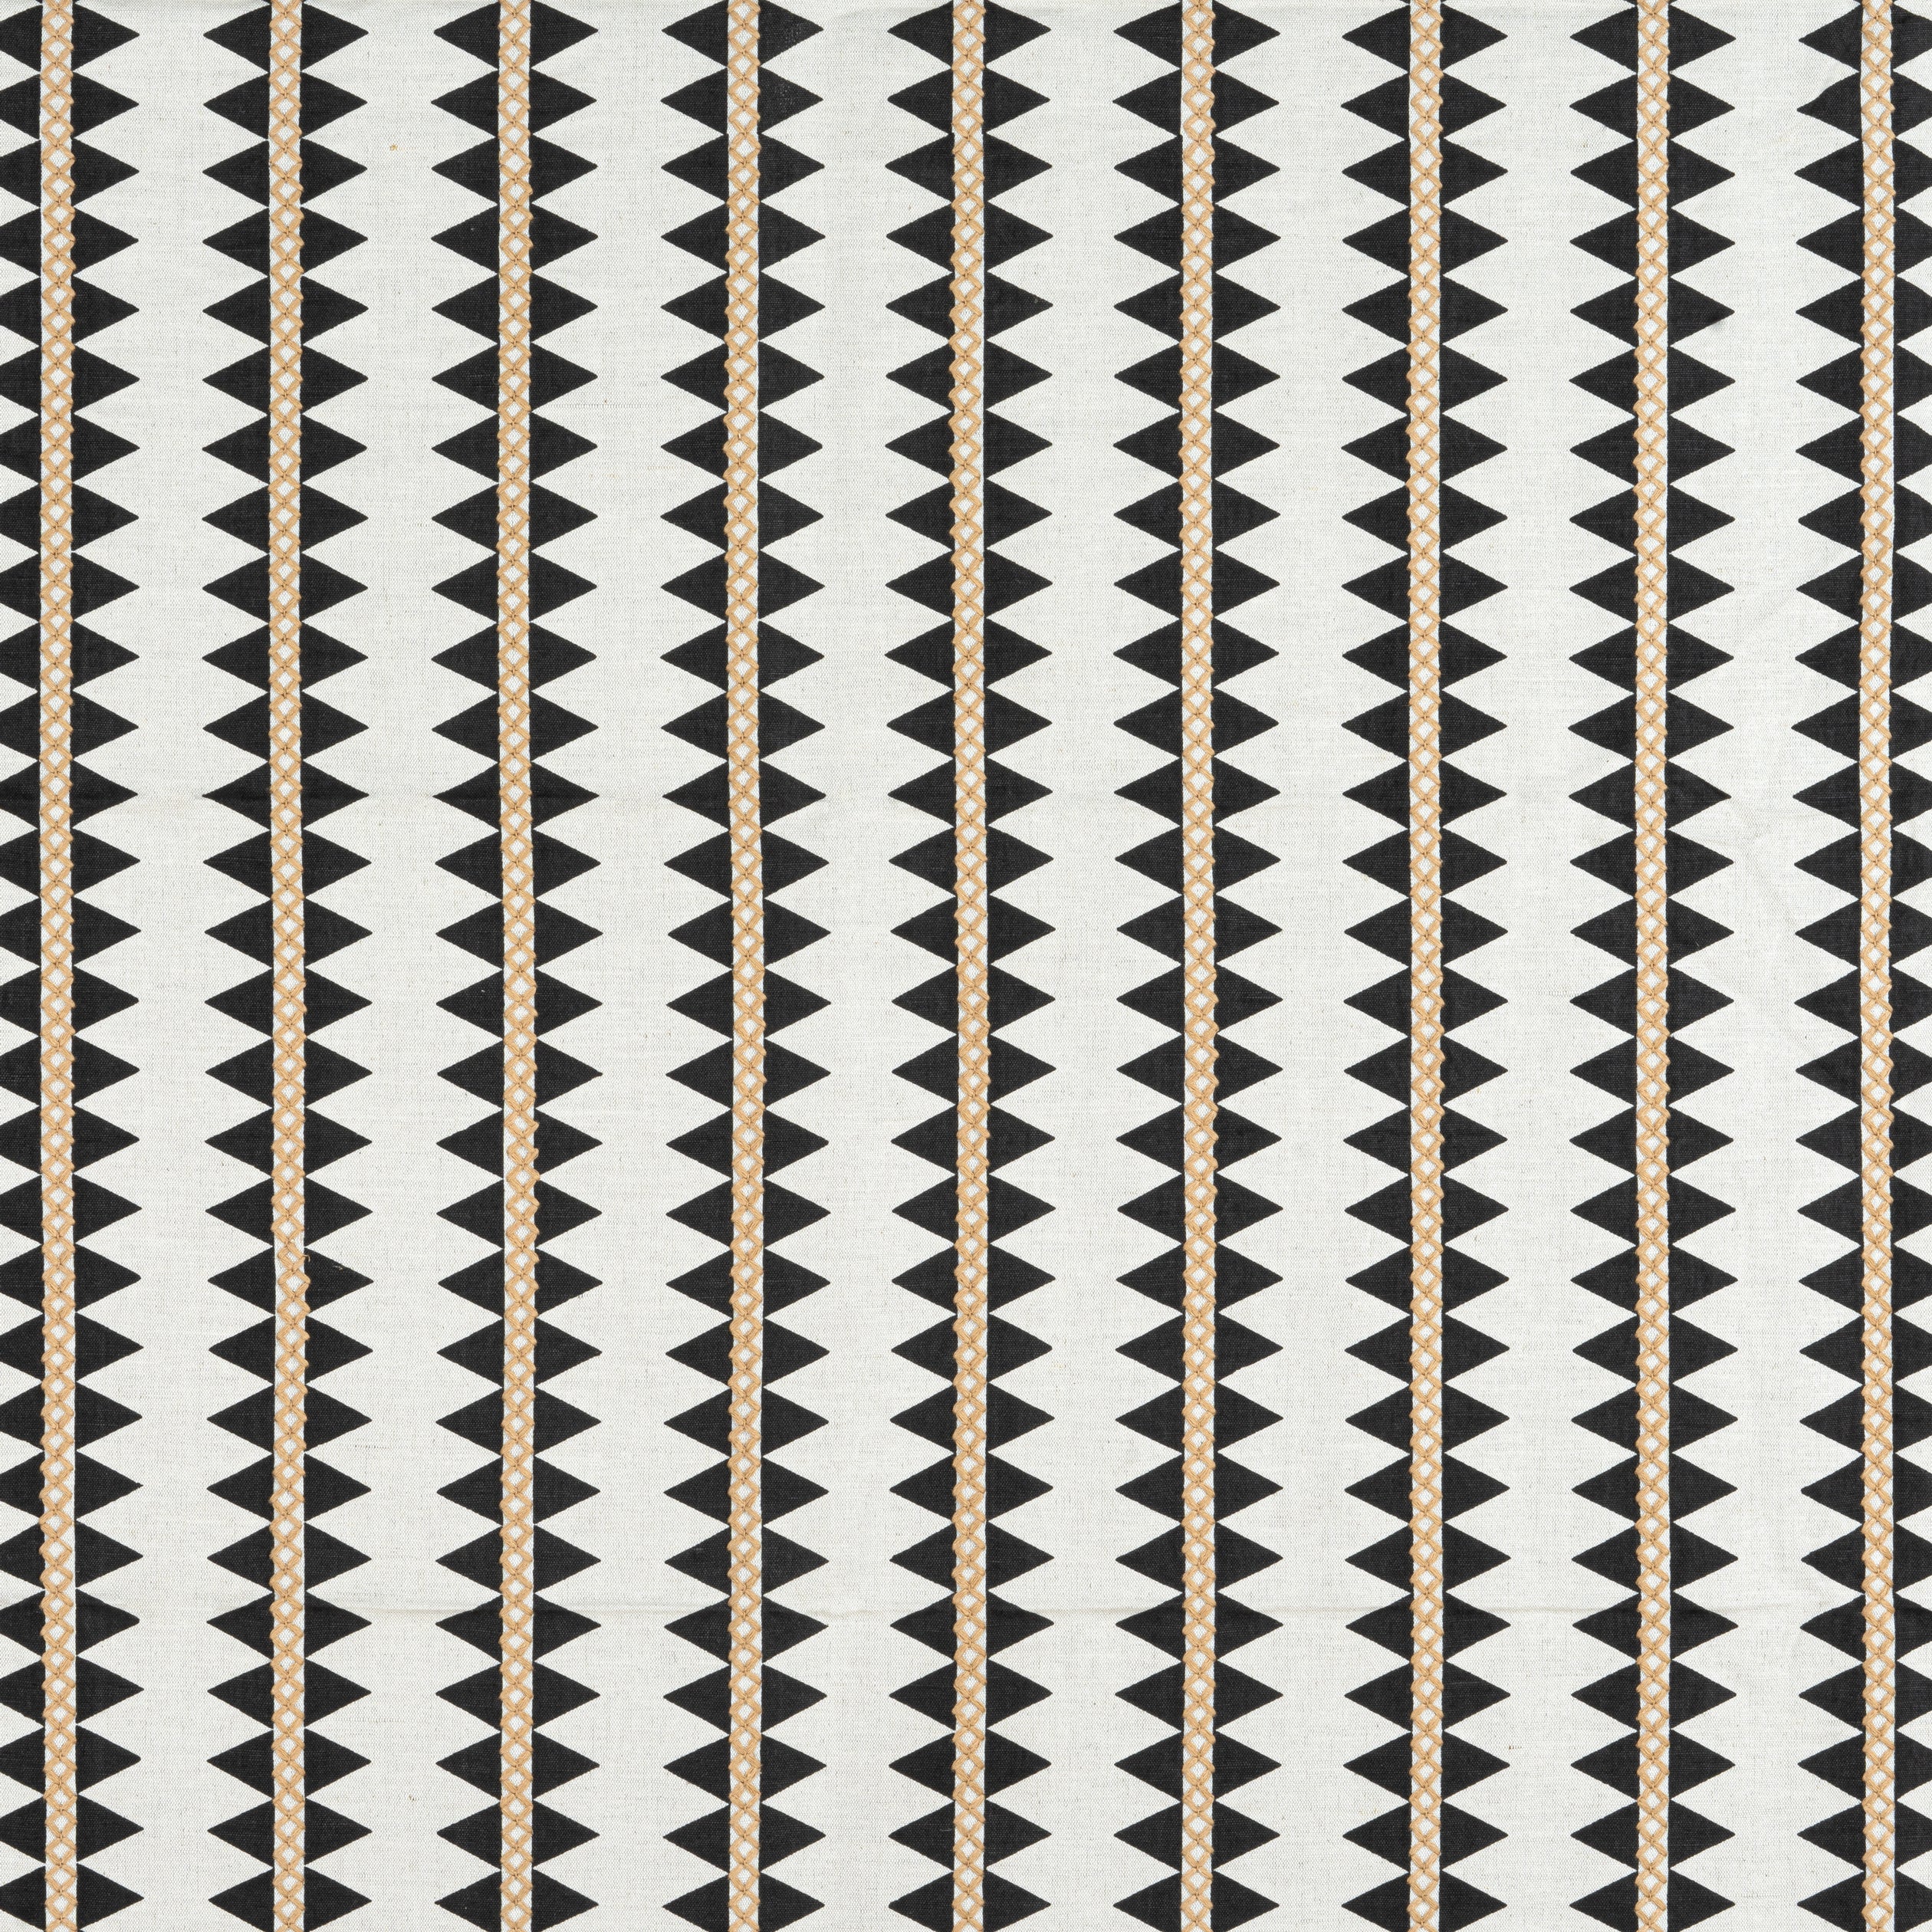 Reno Stripe Embroidery fabric in black color - pattern number W713240 - by Thibaut in the Mesa Fabrics collection